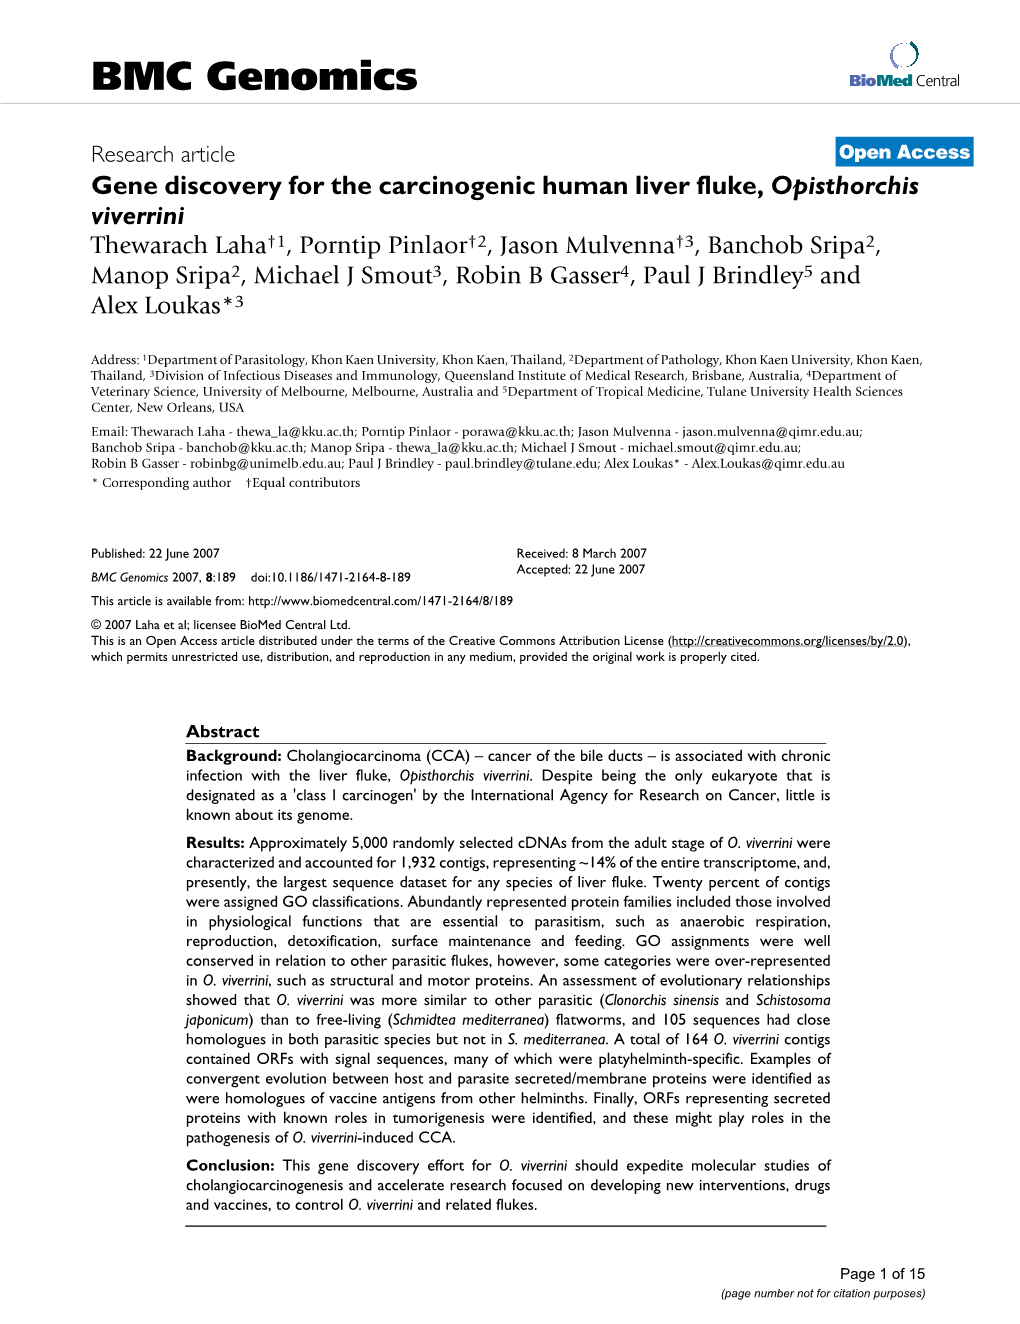 Gene Discovery for the Carcinogenic Human Liver Fluke, Opisthorchis